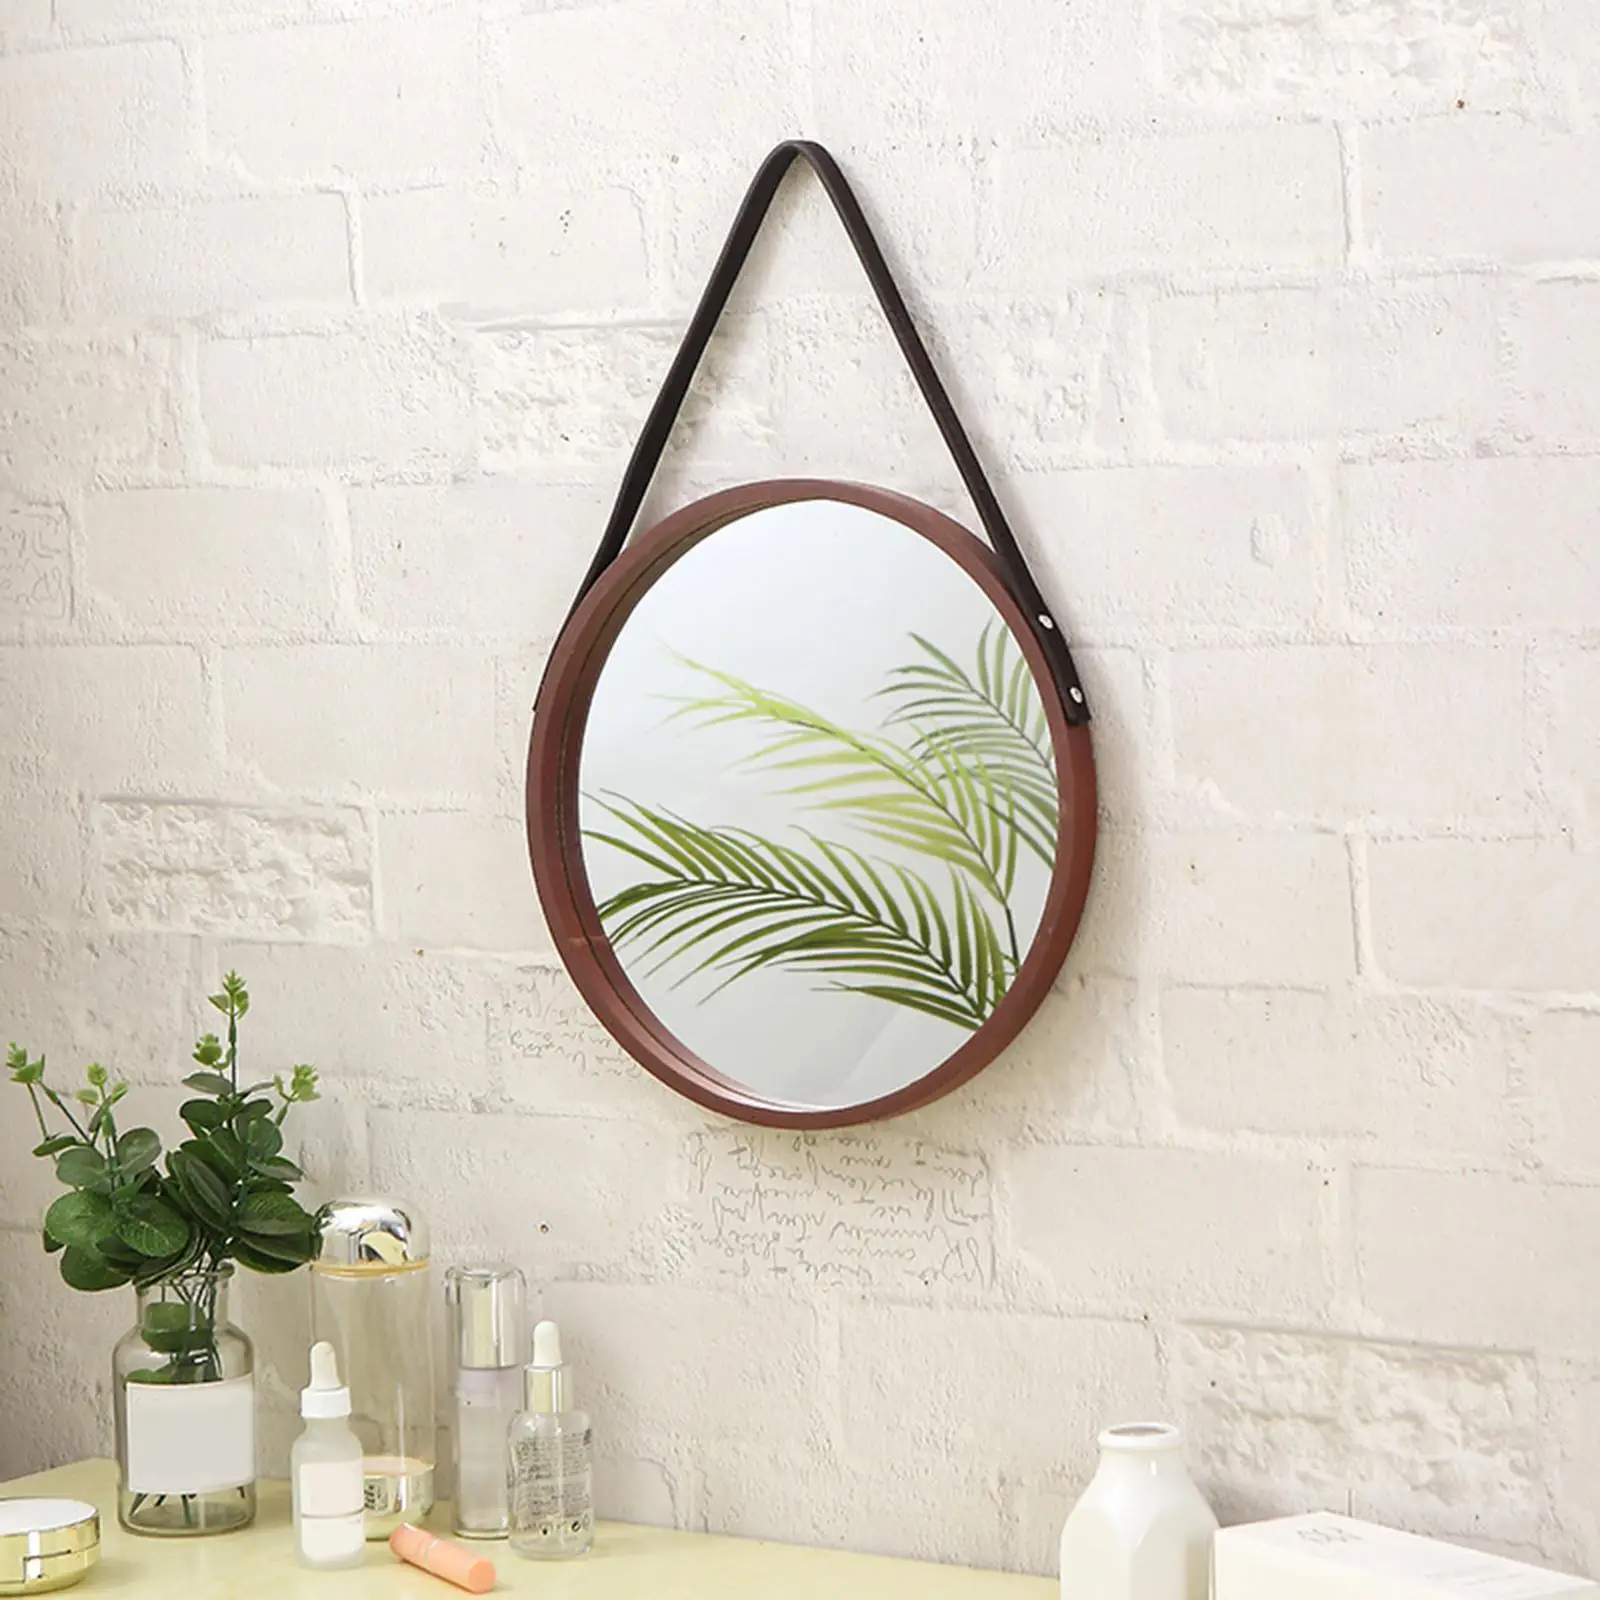 Round Wall Mirror with Circle Circular Frame Decorative Hanging Rope for Rustic Bathroom Vanity Entryway Living Room Bed Decor